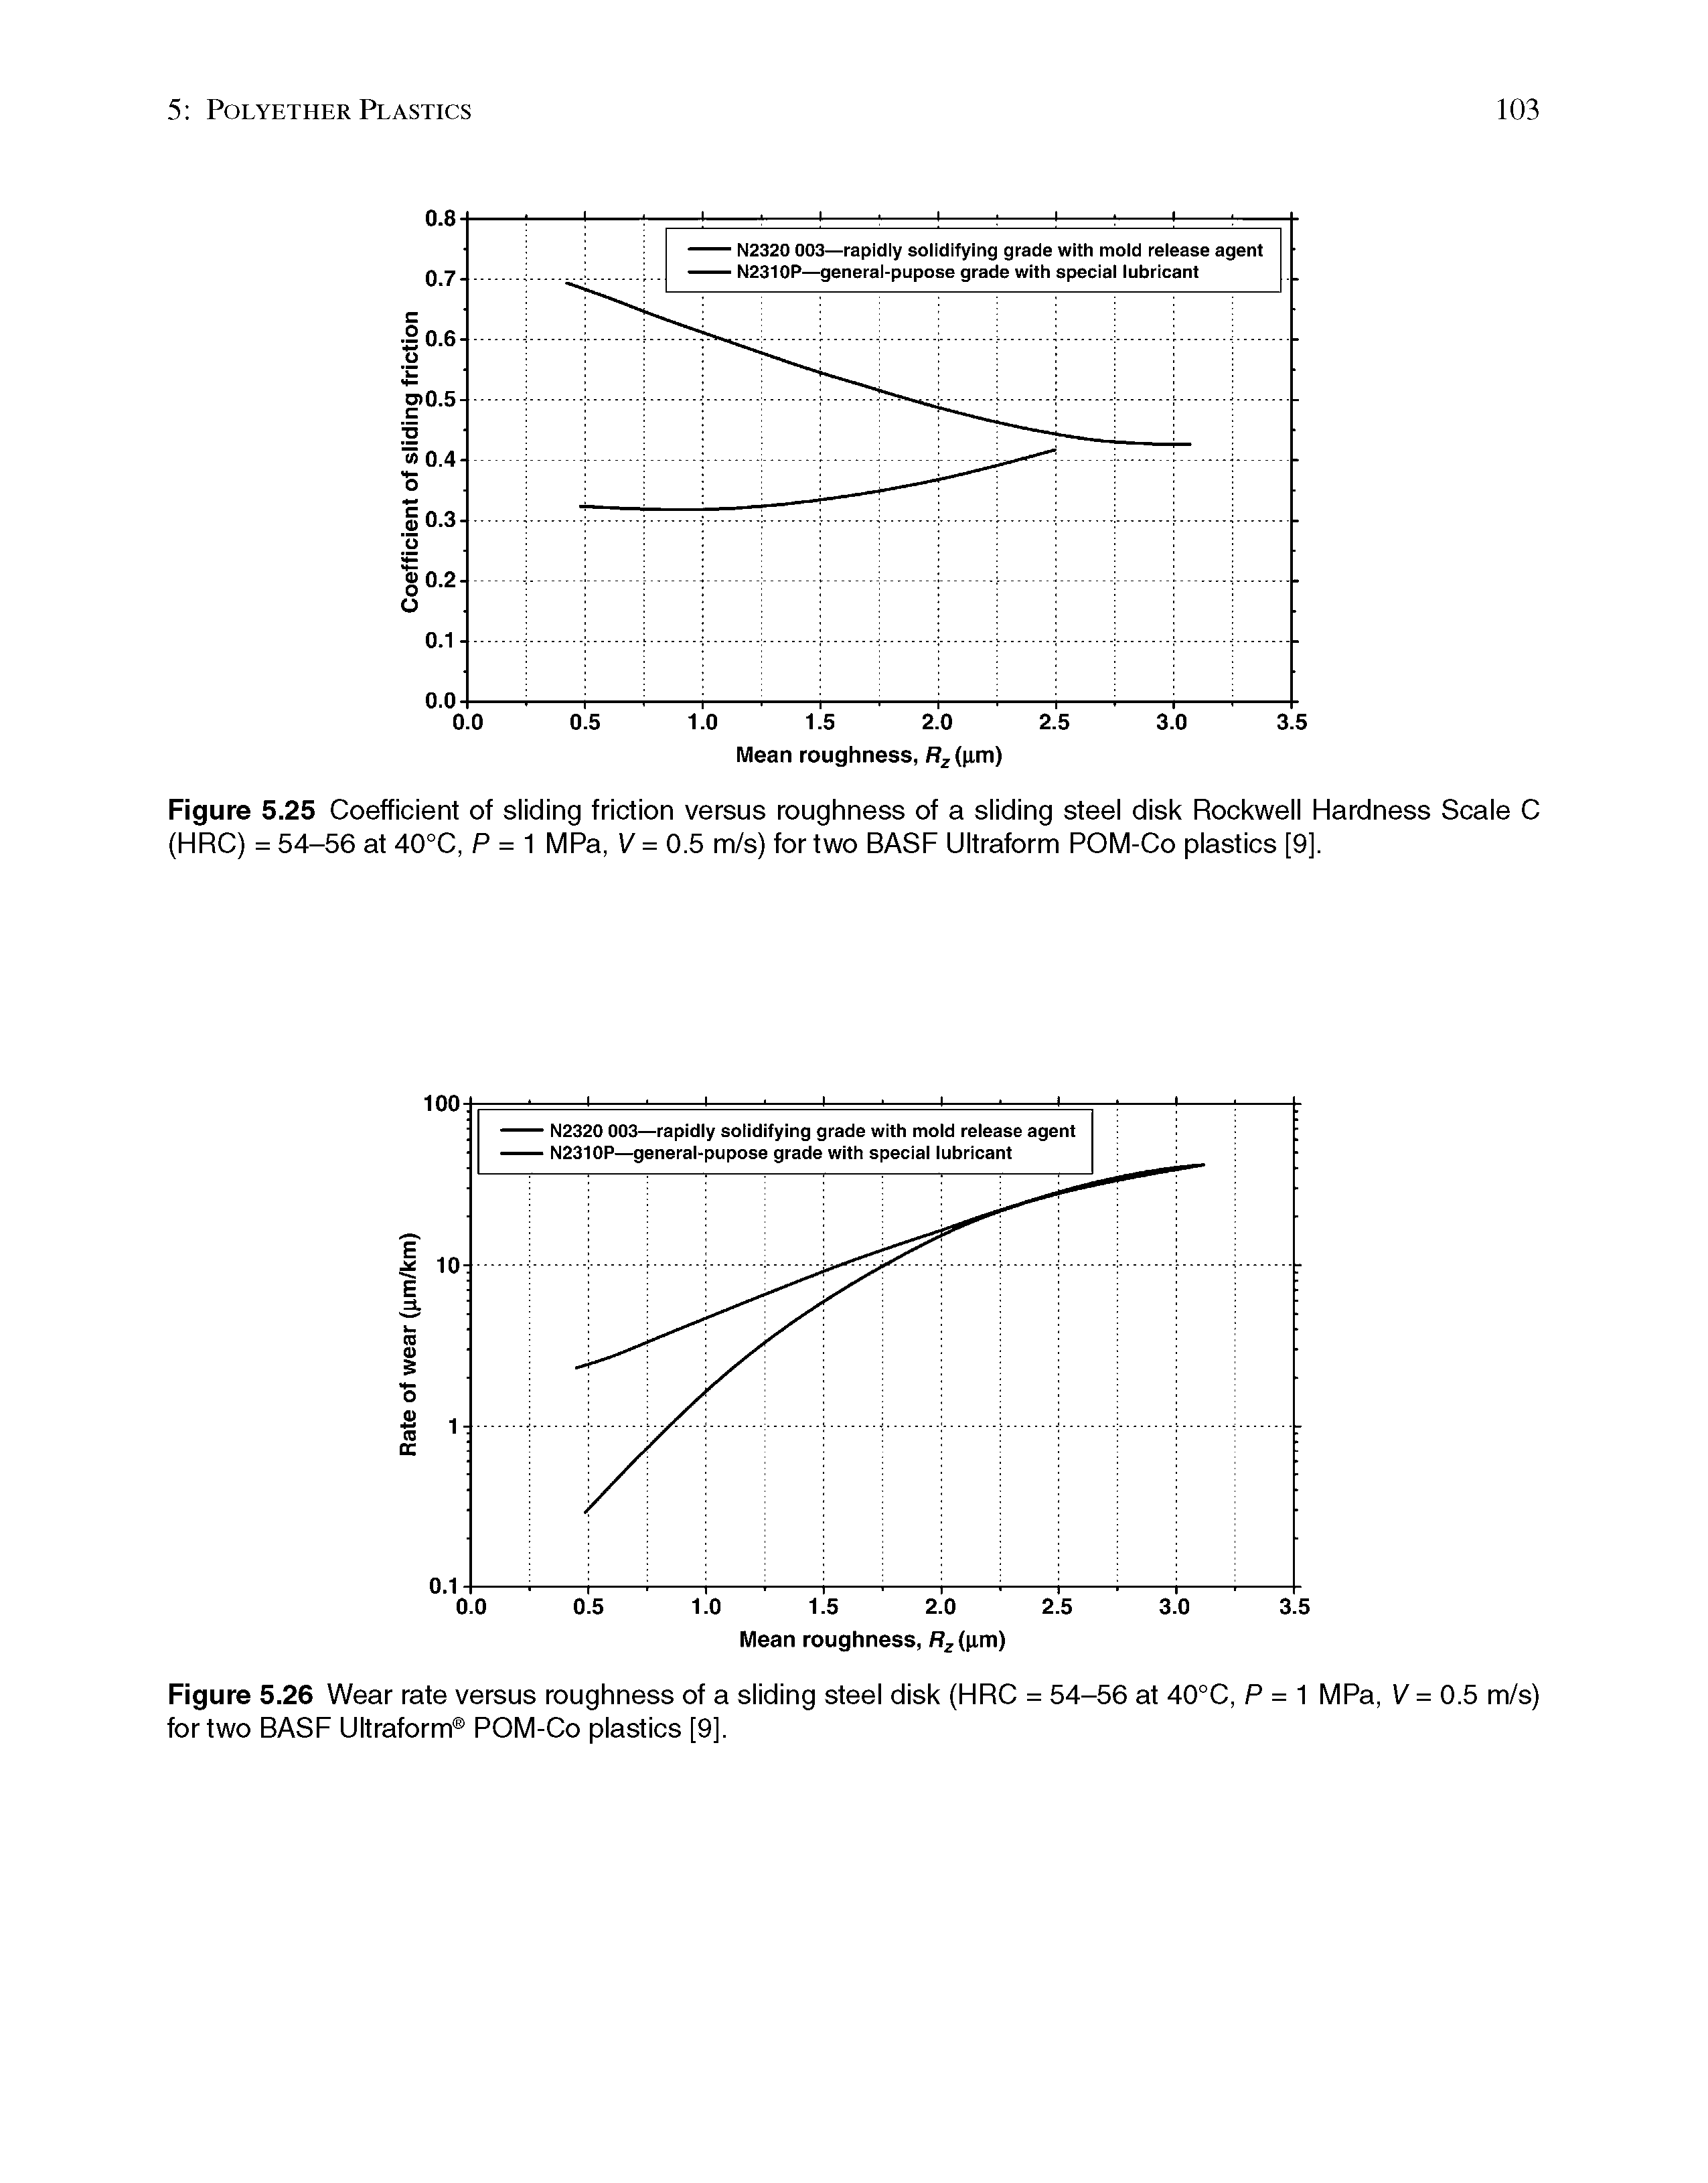 Figure 5.25 Coefficient of sliding friction versus roughness of a sliding steel disk Rockwell Hardness Scale C (HRC) = 54-56 at 40°C, P = 1 MPa, V = 0.5 m/s) for two BASF Ultraform POM-Co plastics [9].